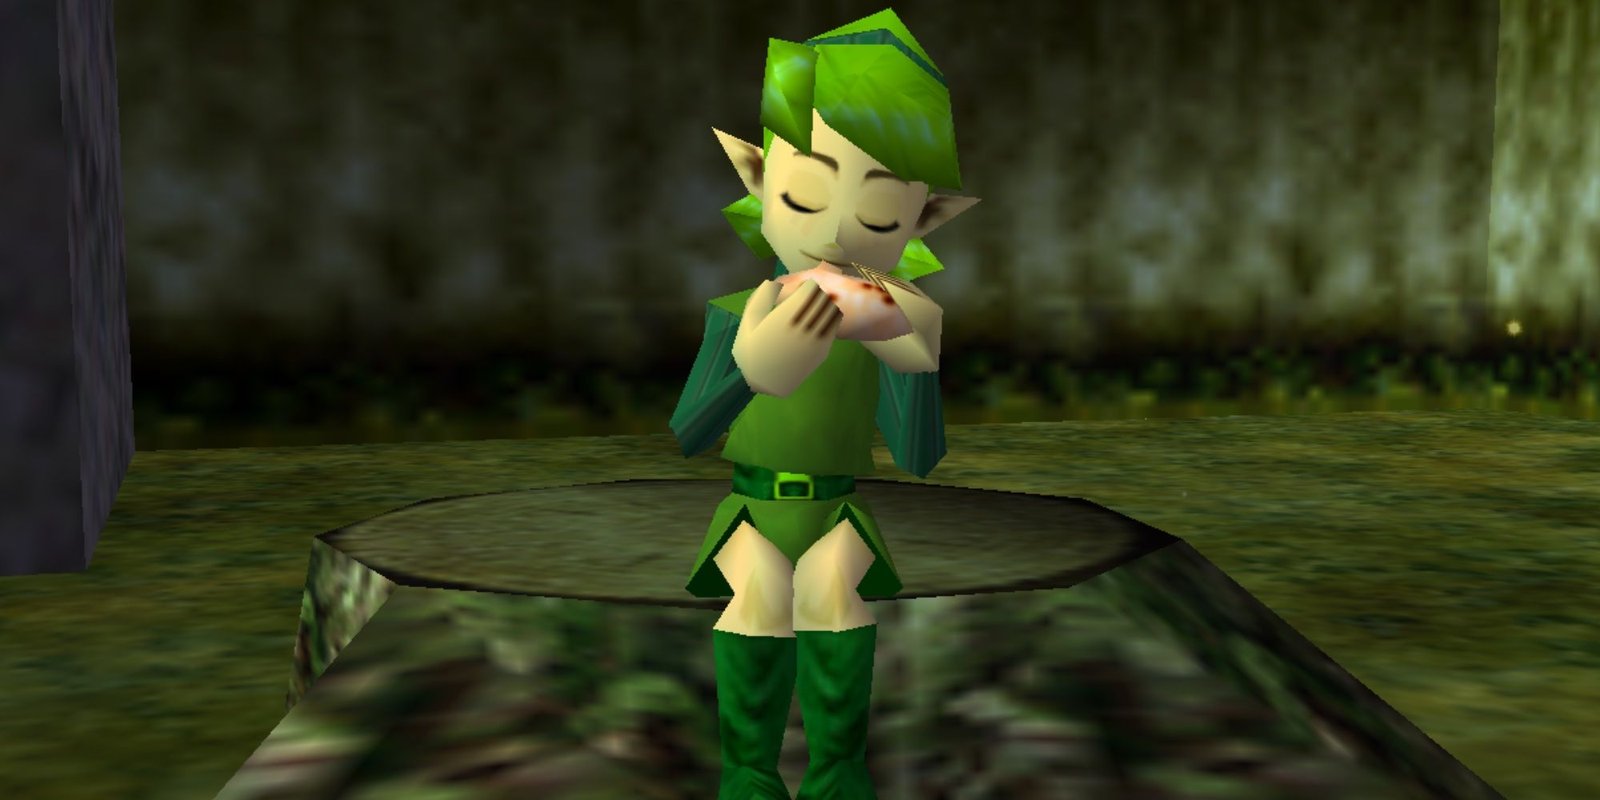 SAria playing her ocarina while sitting on top of a tree stump